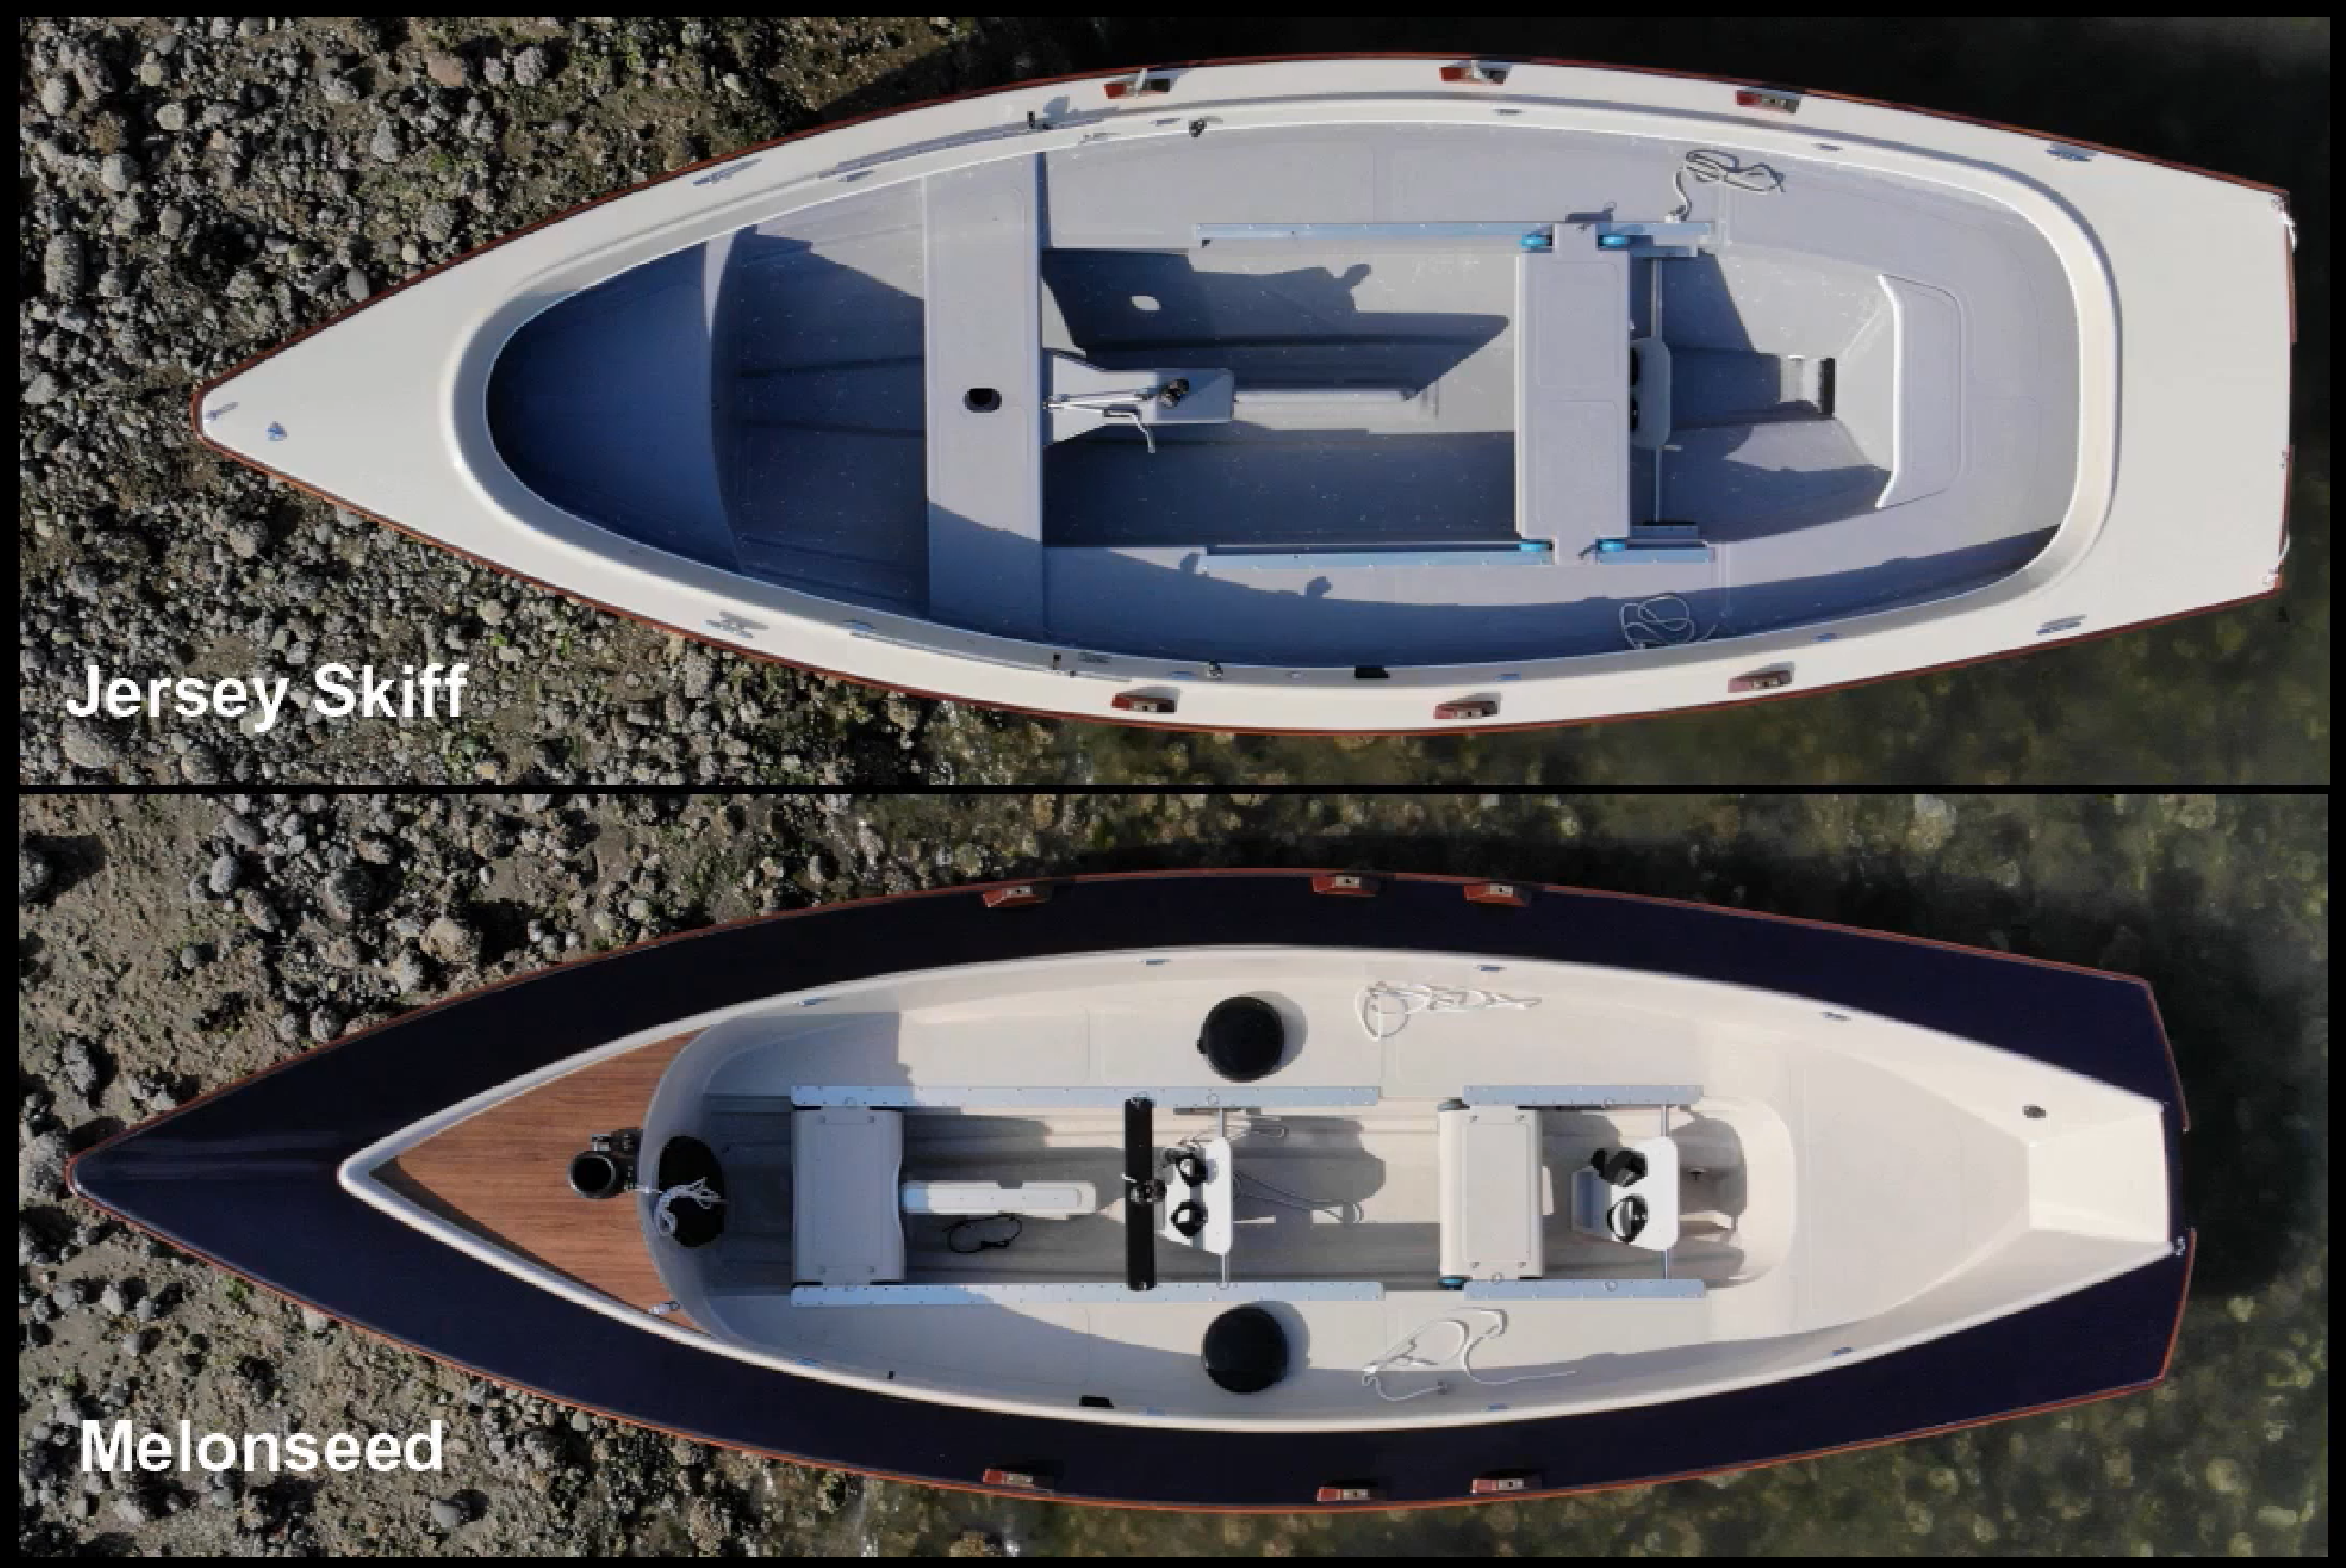 Jersey Skiff and Melonseed overhead view